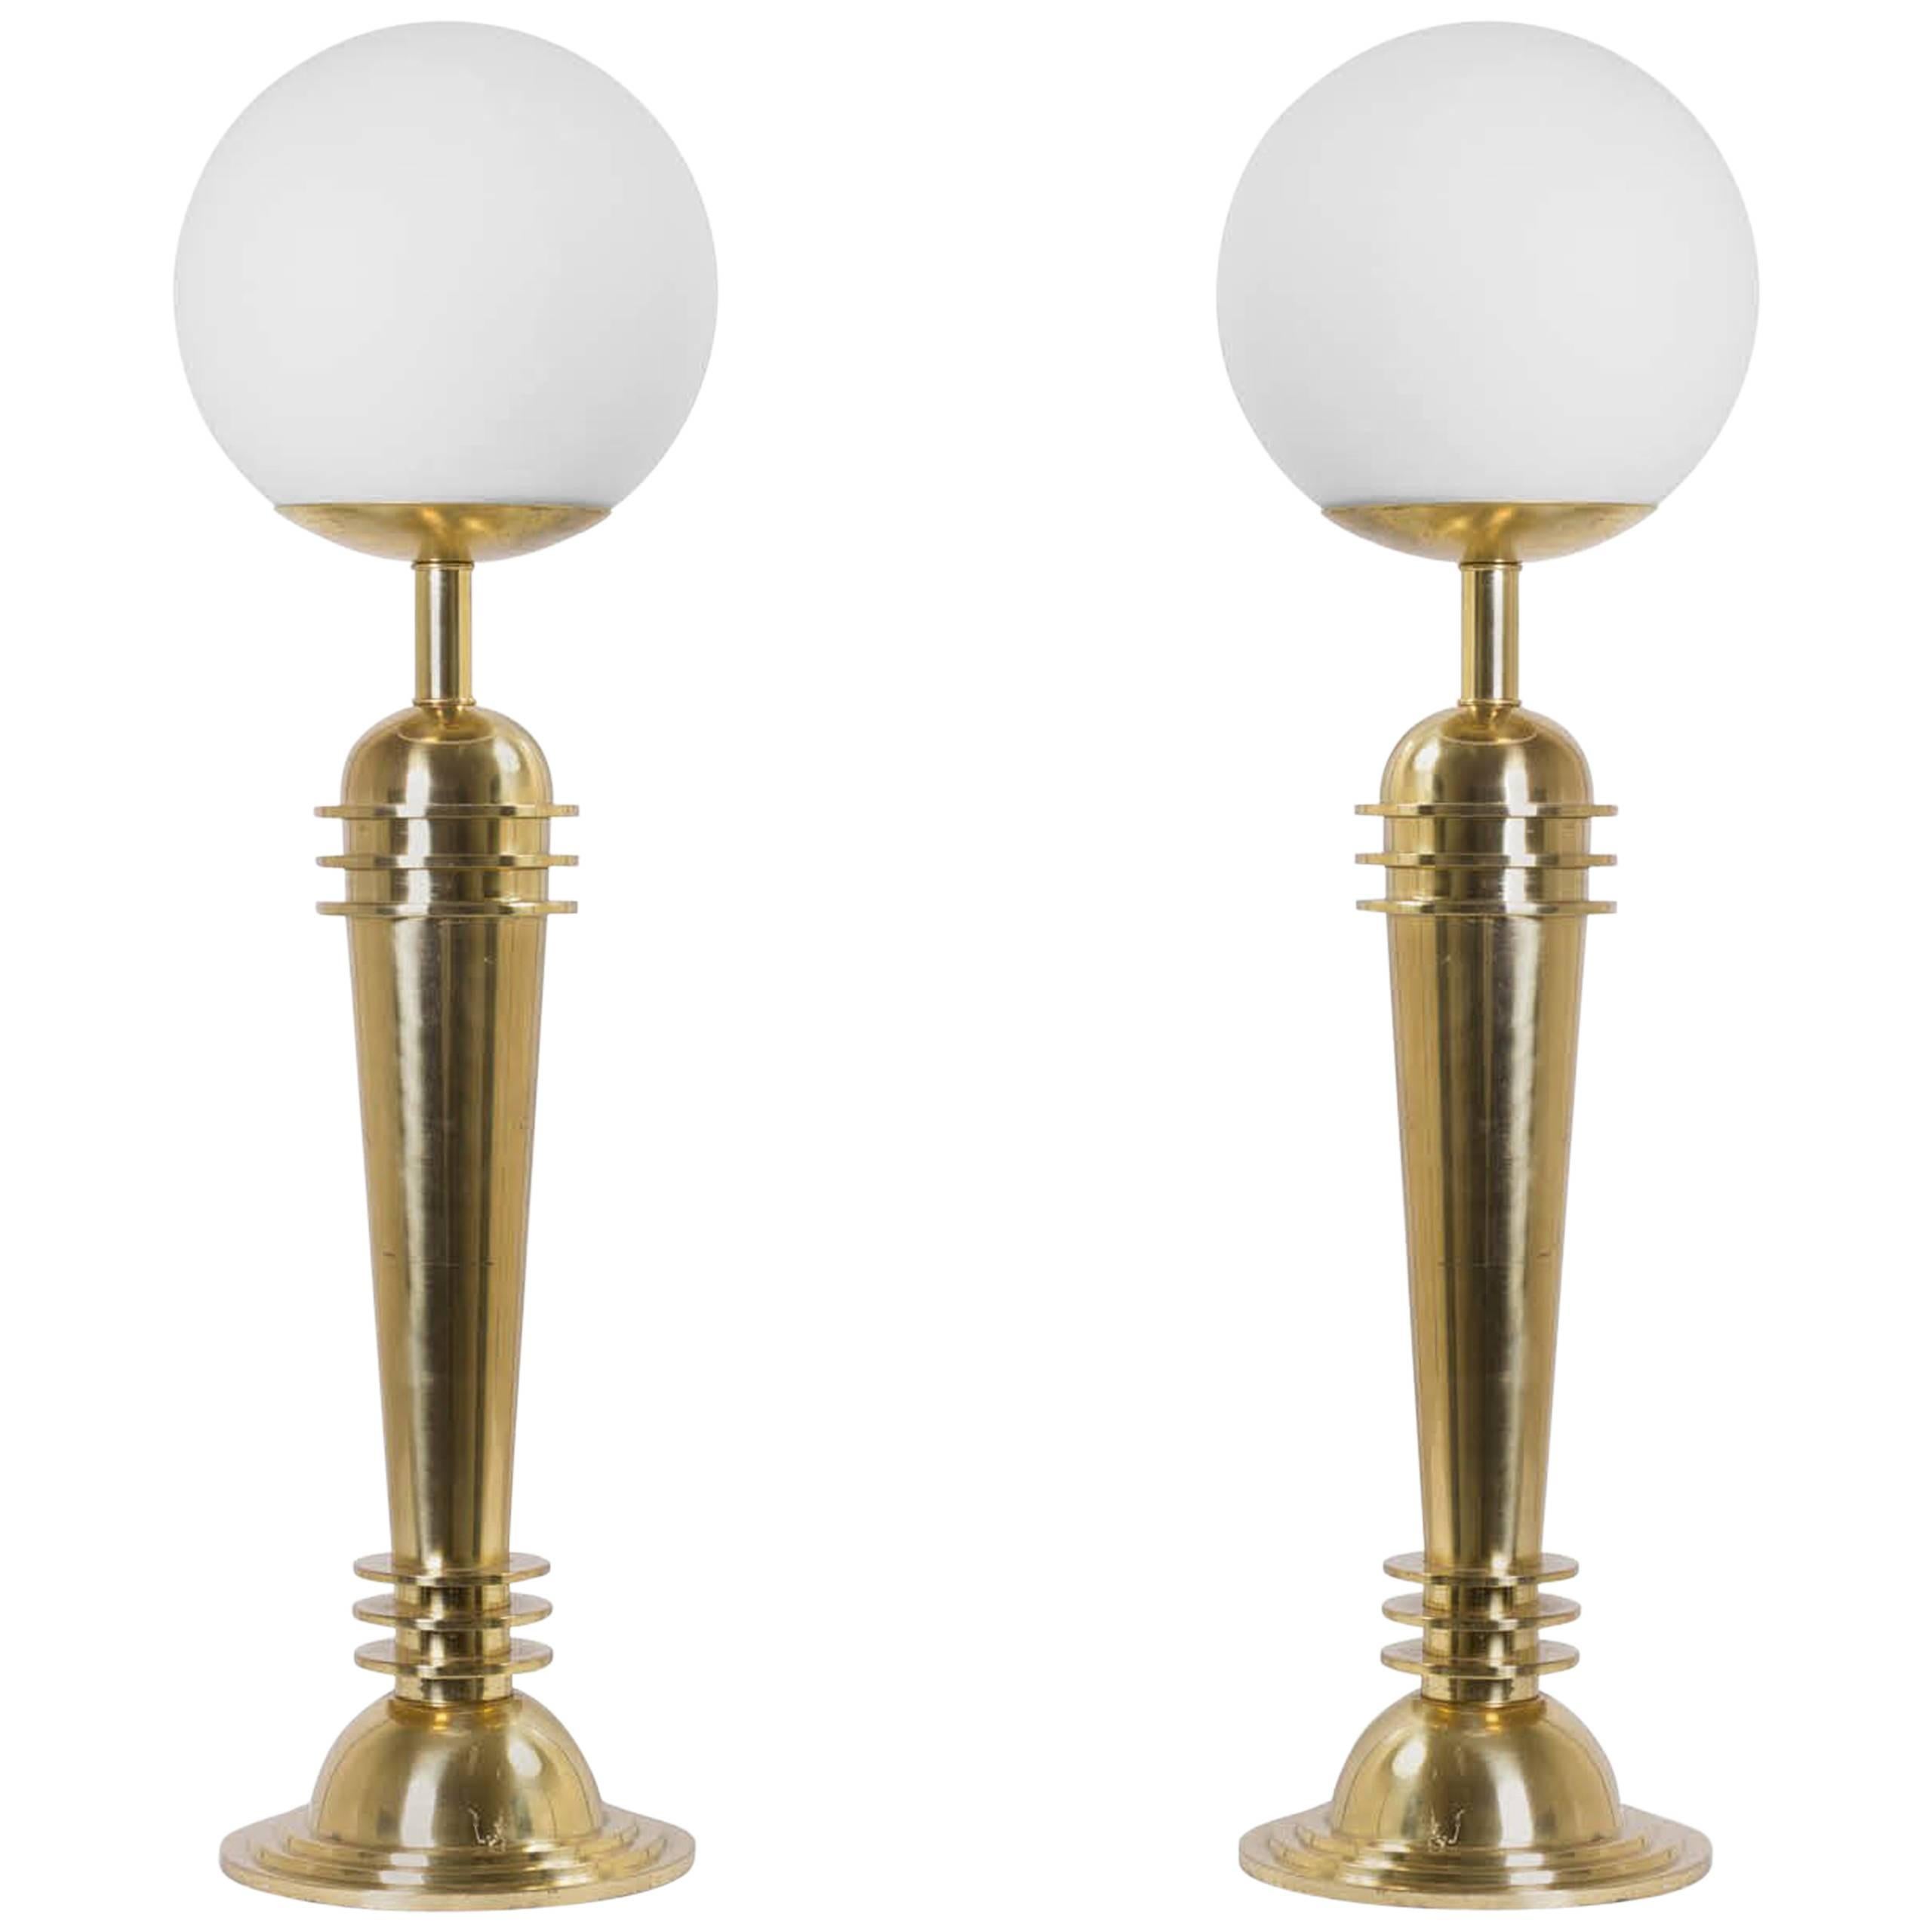 Art Deco Brass Lamps with Frosted Glass Globes, Pair